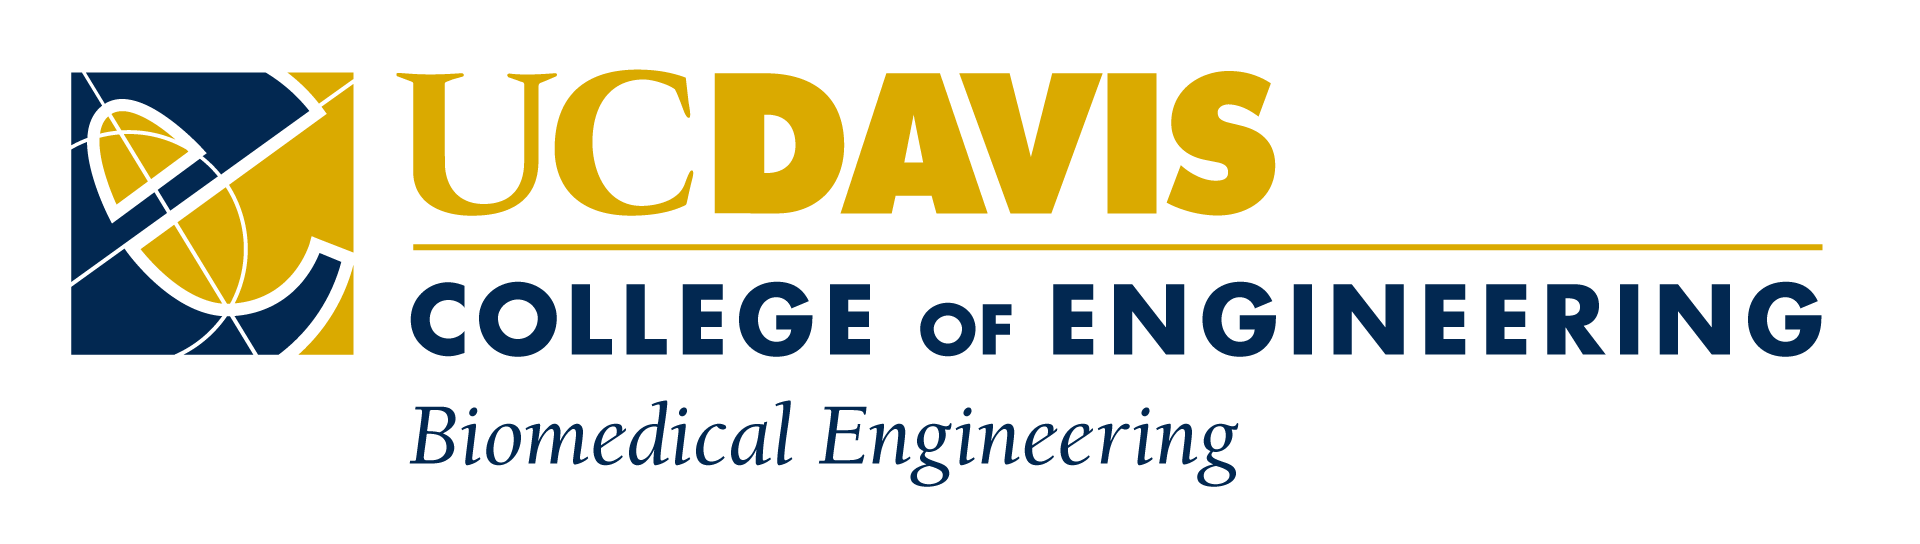 Biomedical Engineering signature with icon has College of Engineering name in first position under the UC Davis wordmark